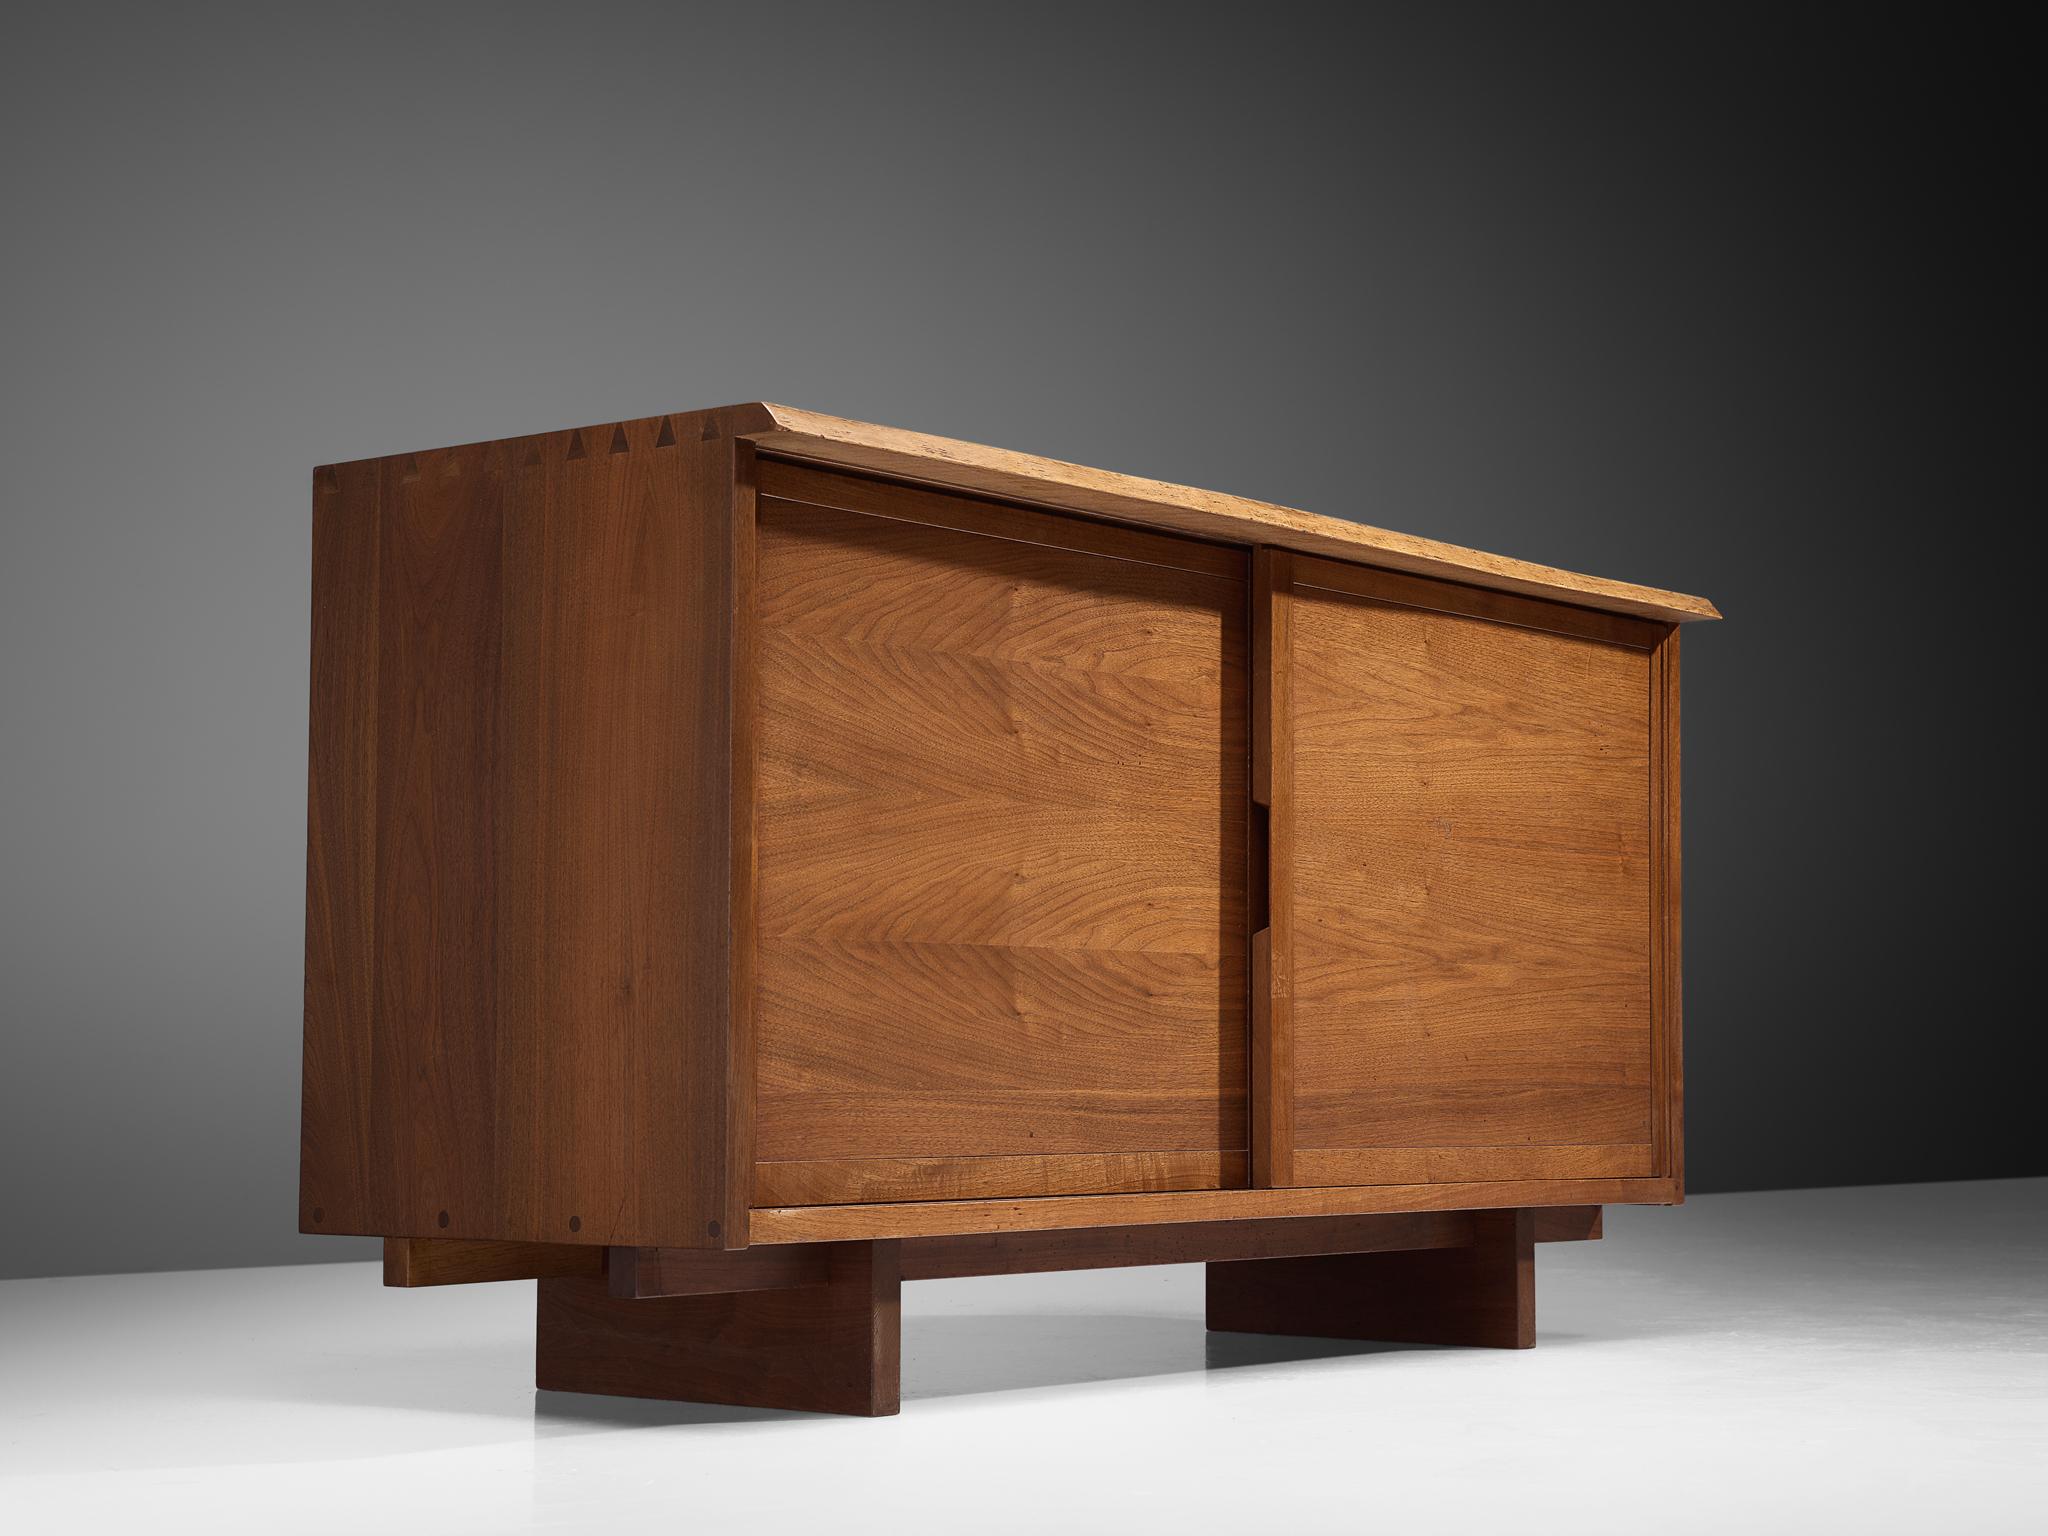 George Nakashima, sliding door cabinet, American walnut, New Hope, PA, 1959

The compartment consists of two sliding doors and the interior contains a pull-out shelf on the right and two adjustable shelves on left. Executed in walnut of which the